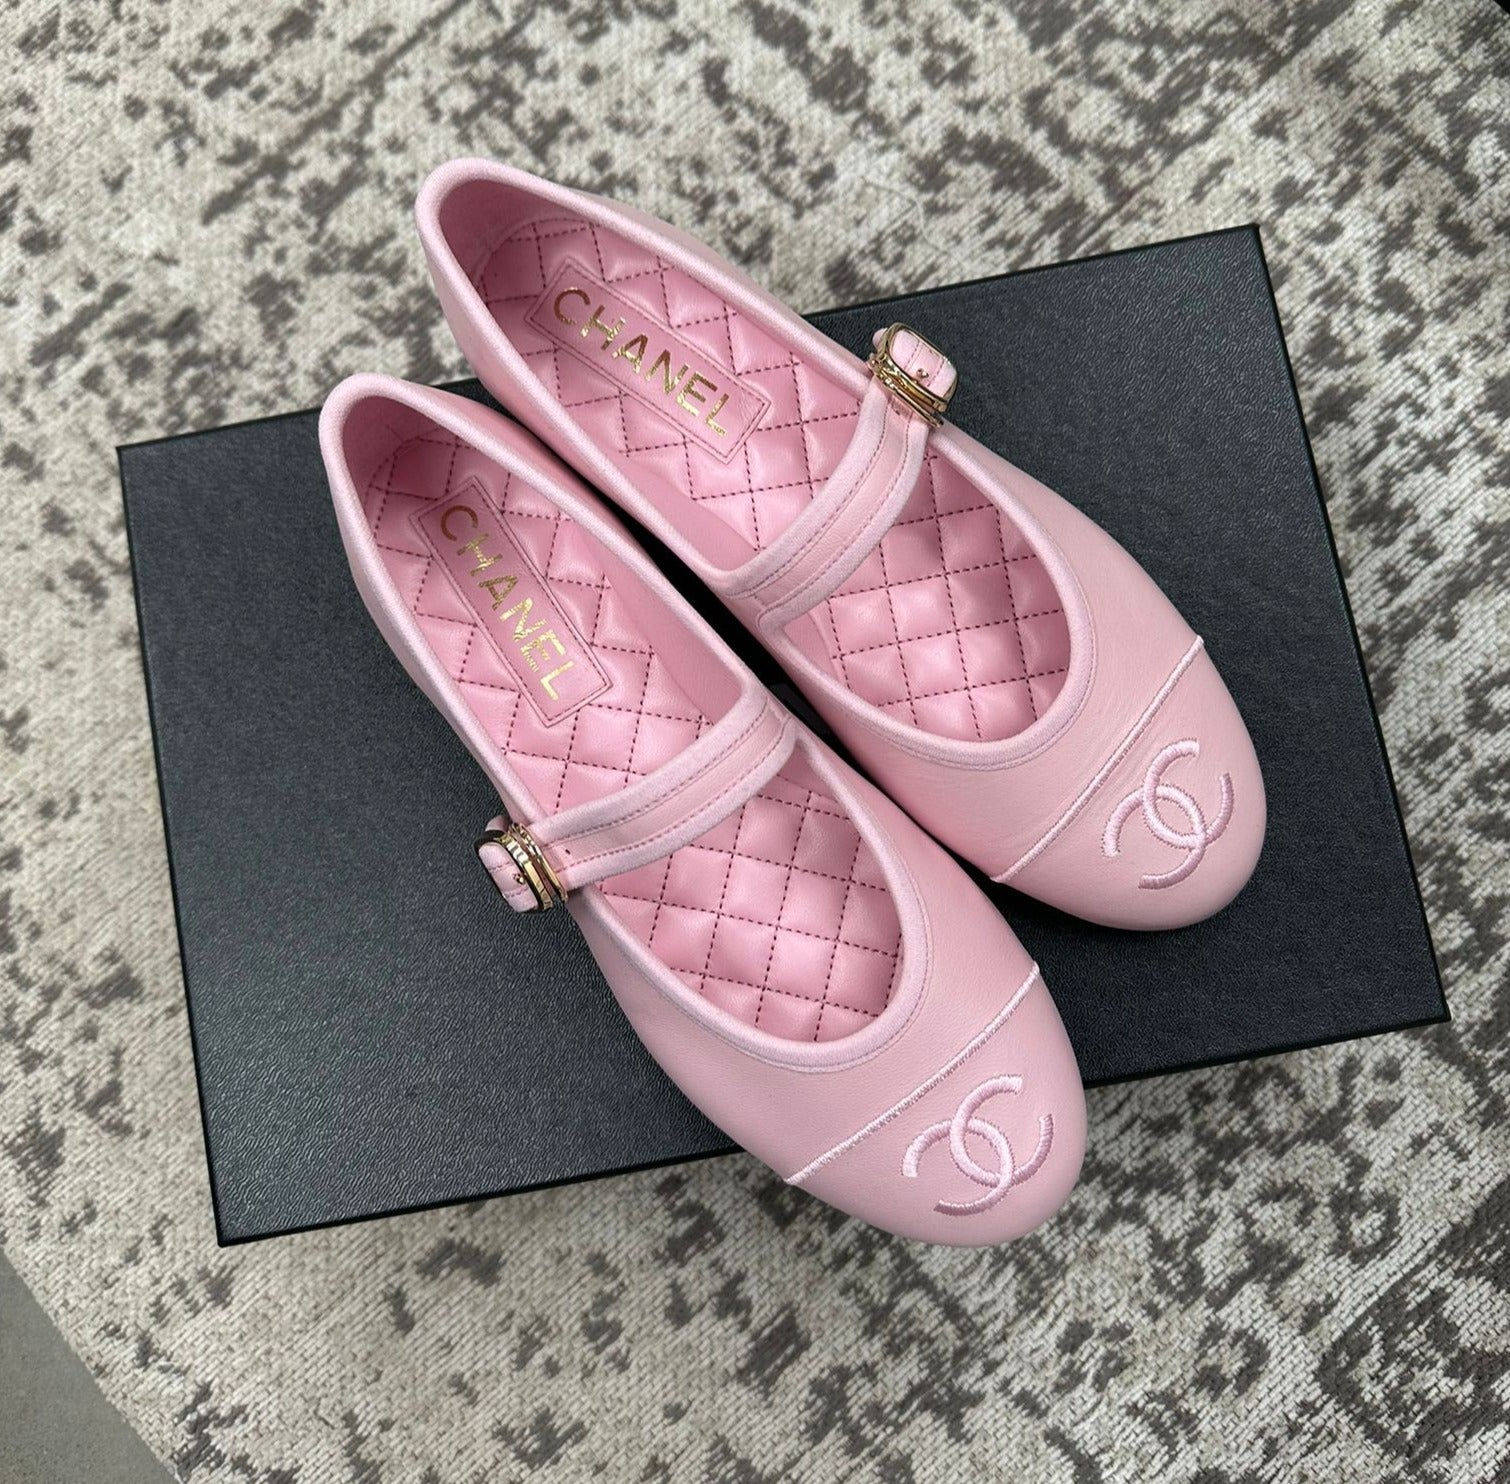 Chanel Lambskin Mary Janes (Pink)